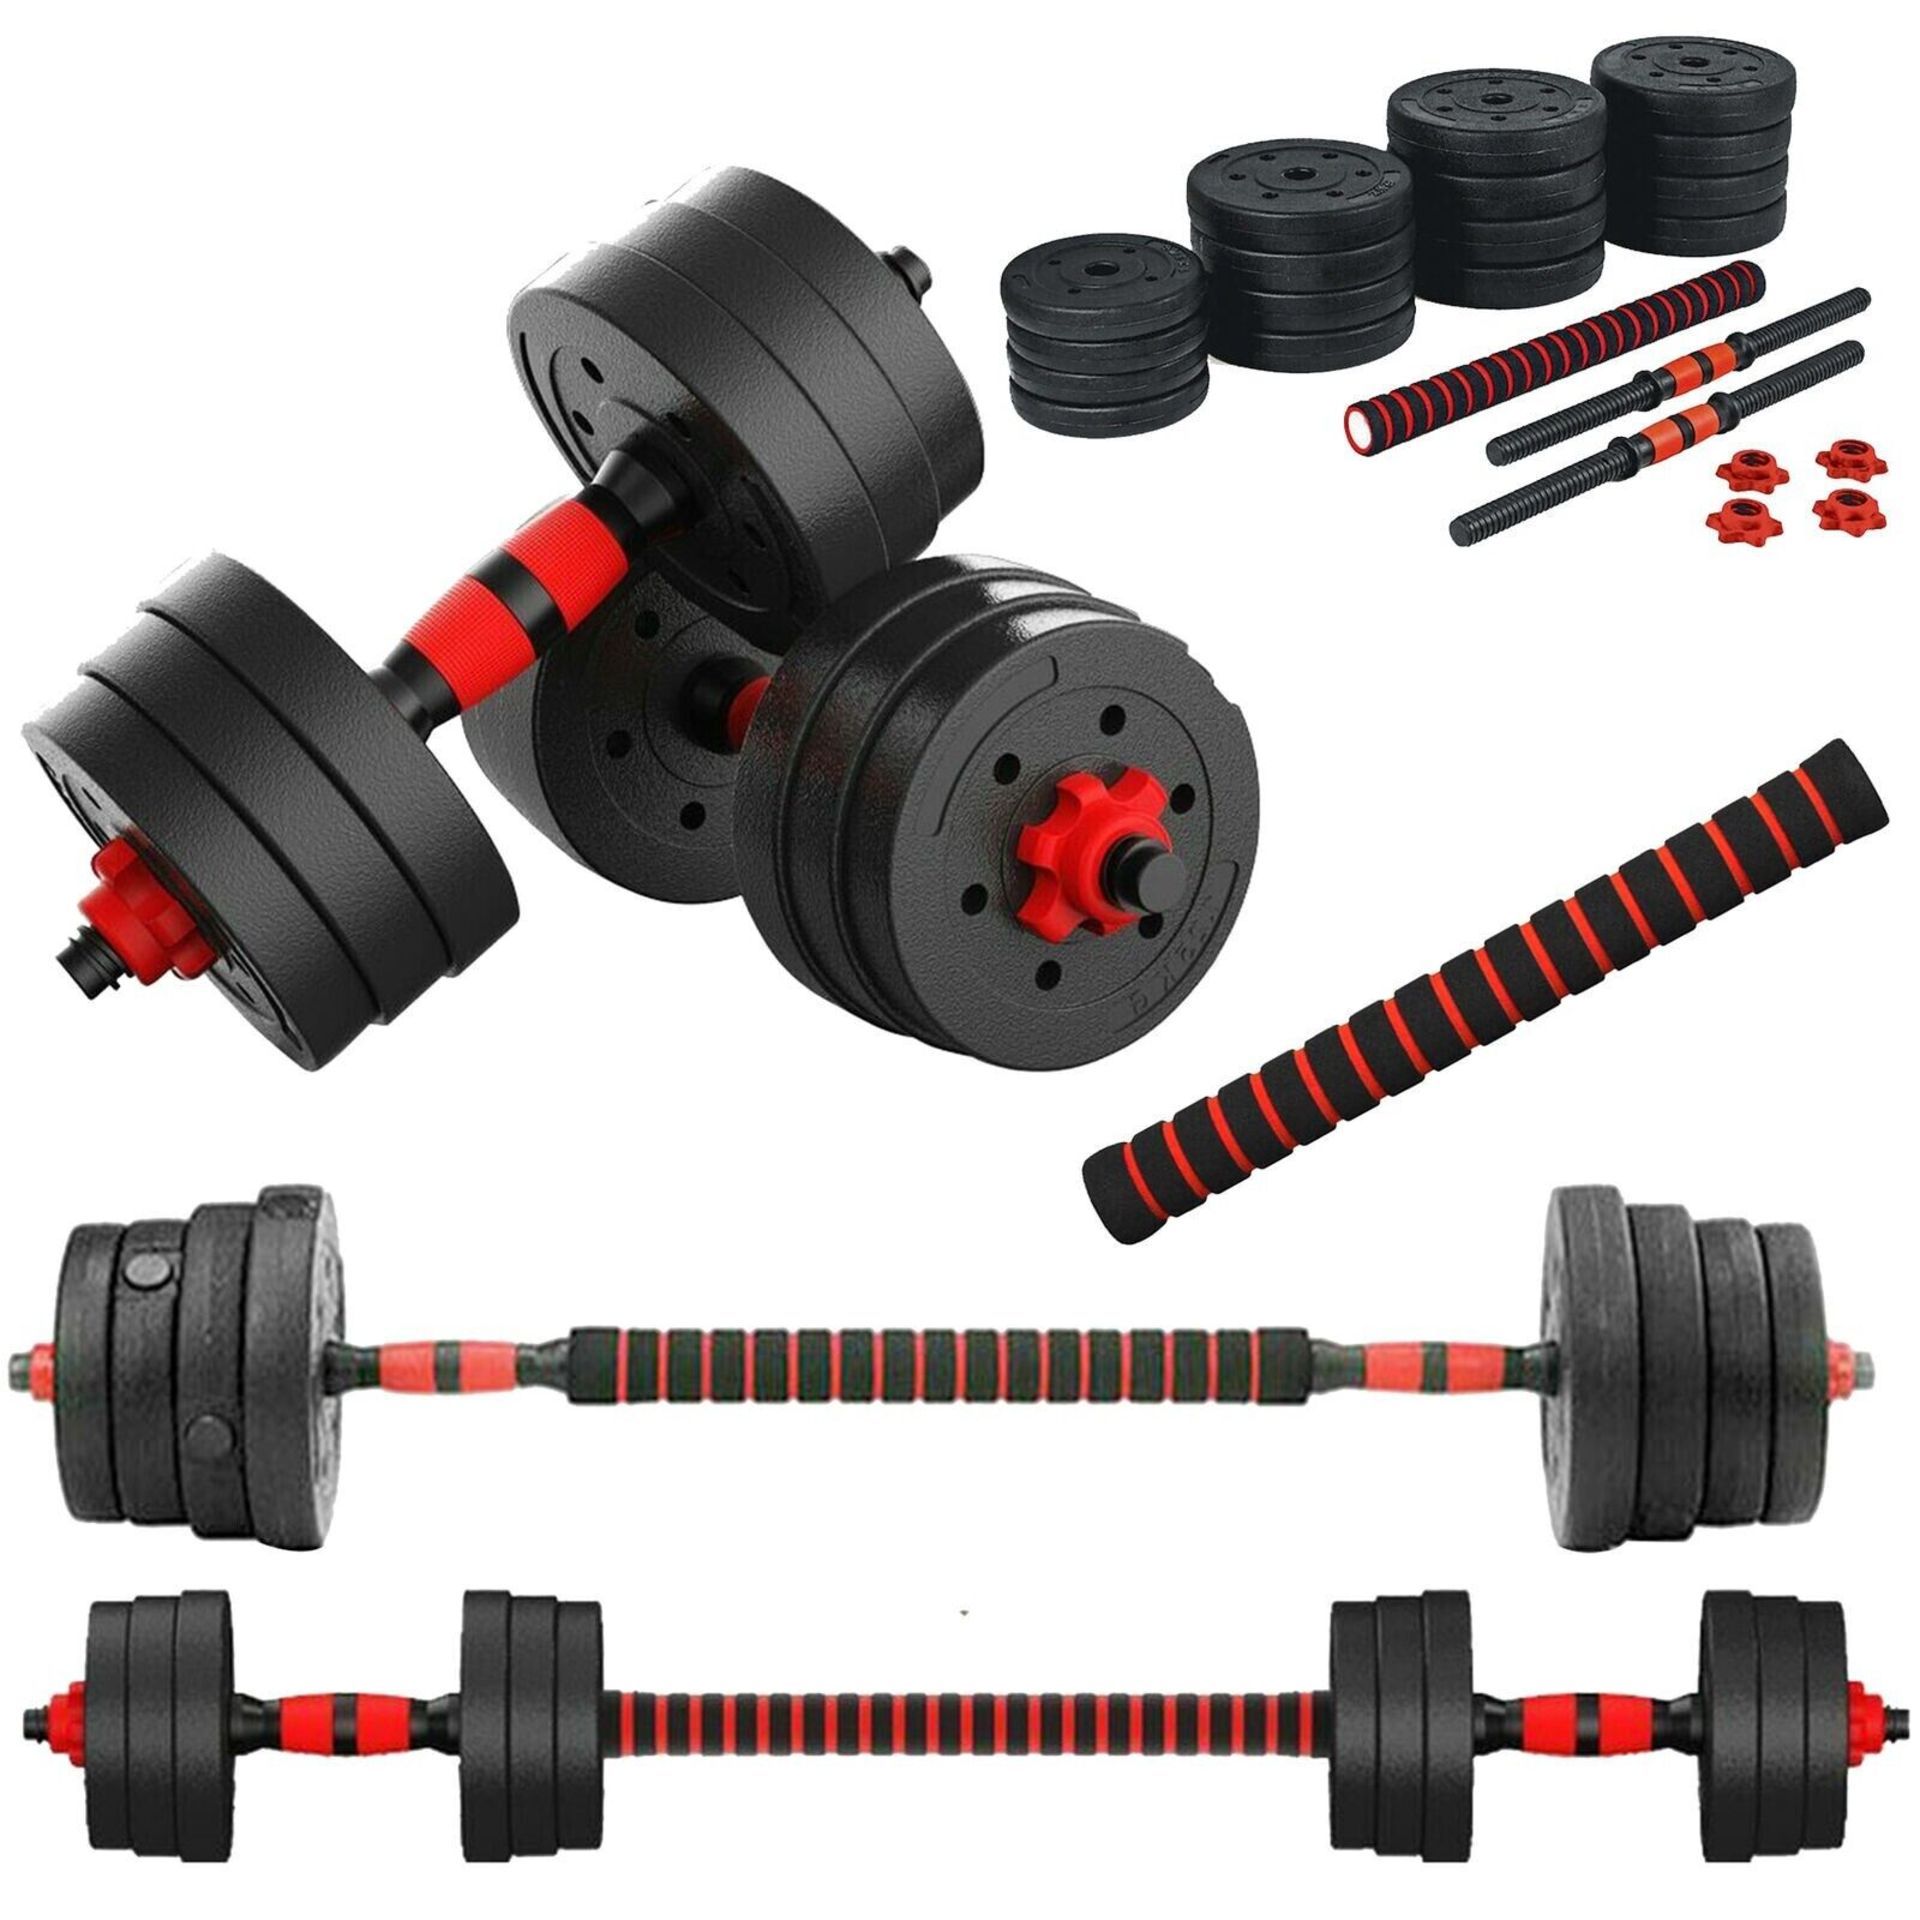 PALLET TO CONTAIN 23 X SETS OF 40kg Dumbbell Barbell Bar Weight Set. (PALLET ID: 3) Adjustable